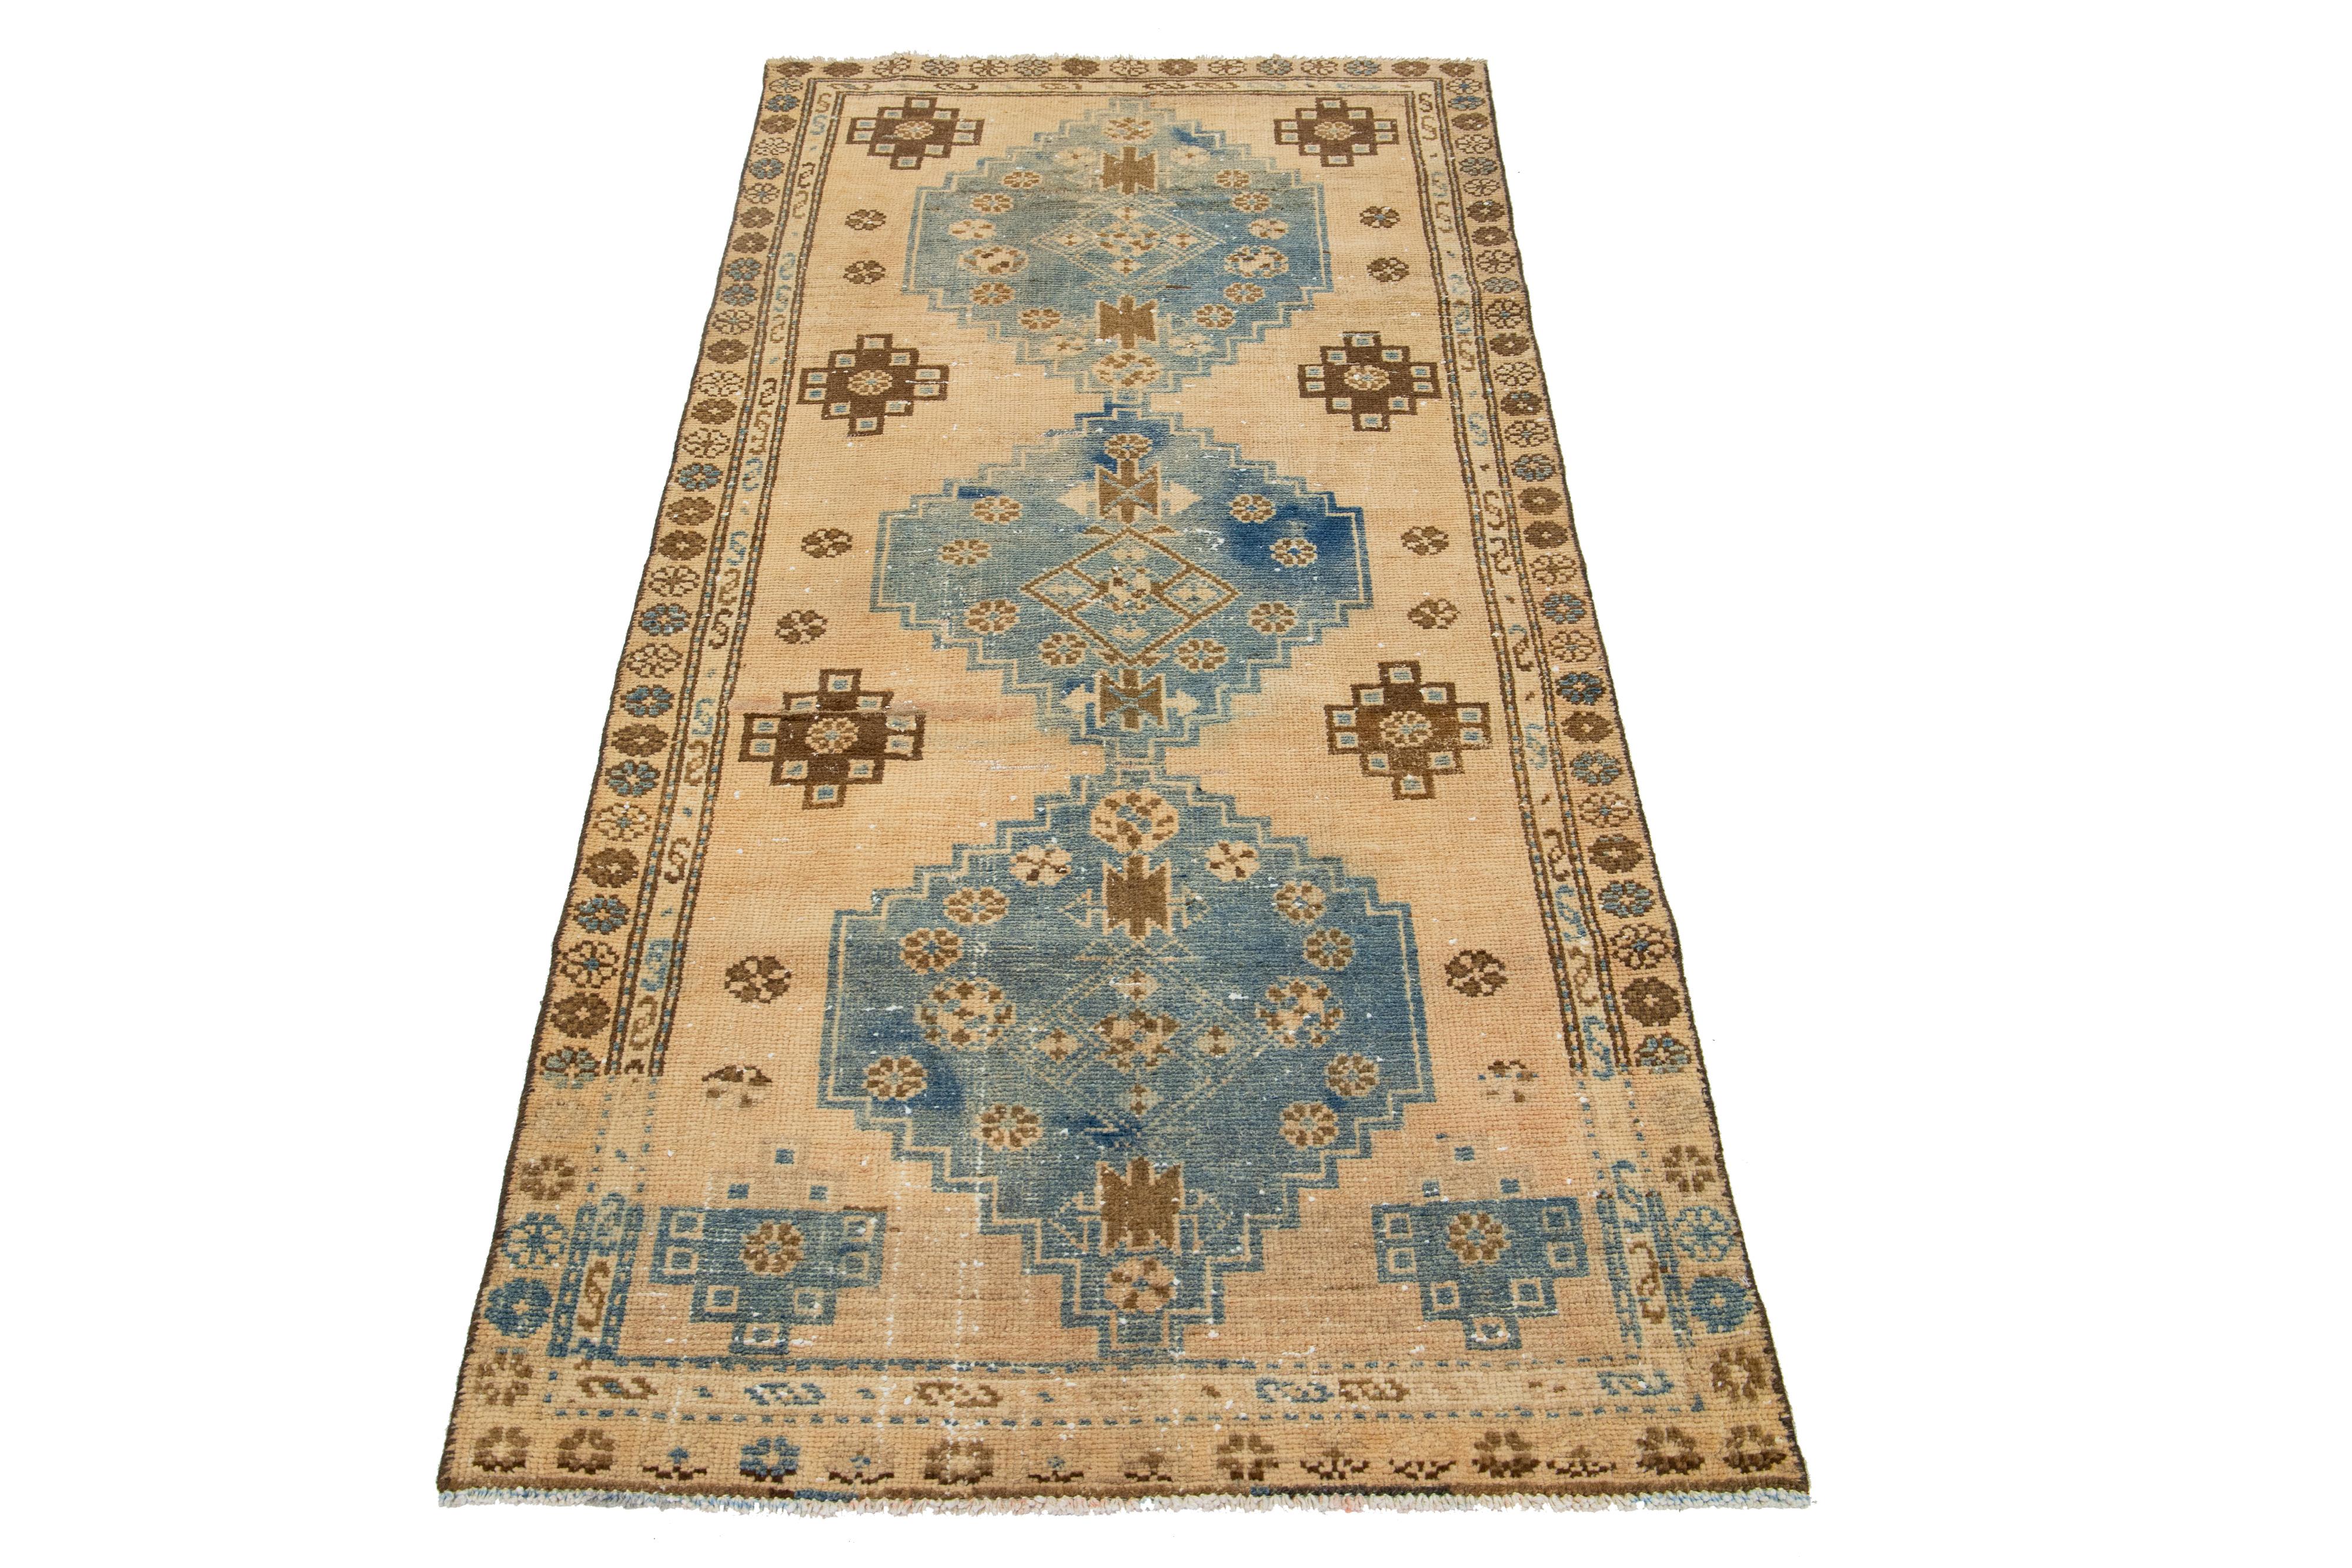 The Antique Hamadan runner is crafted from hand-knotted wool and features a tan field enhanced by a captivating tribal pattern design with blue accents.

This rug measures 3' x 6'3